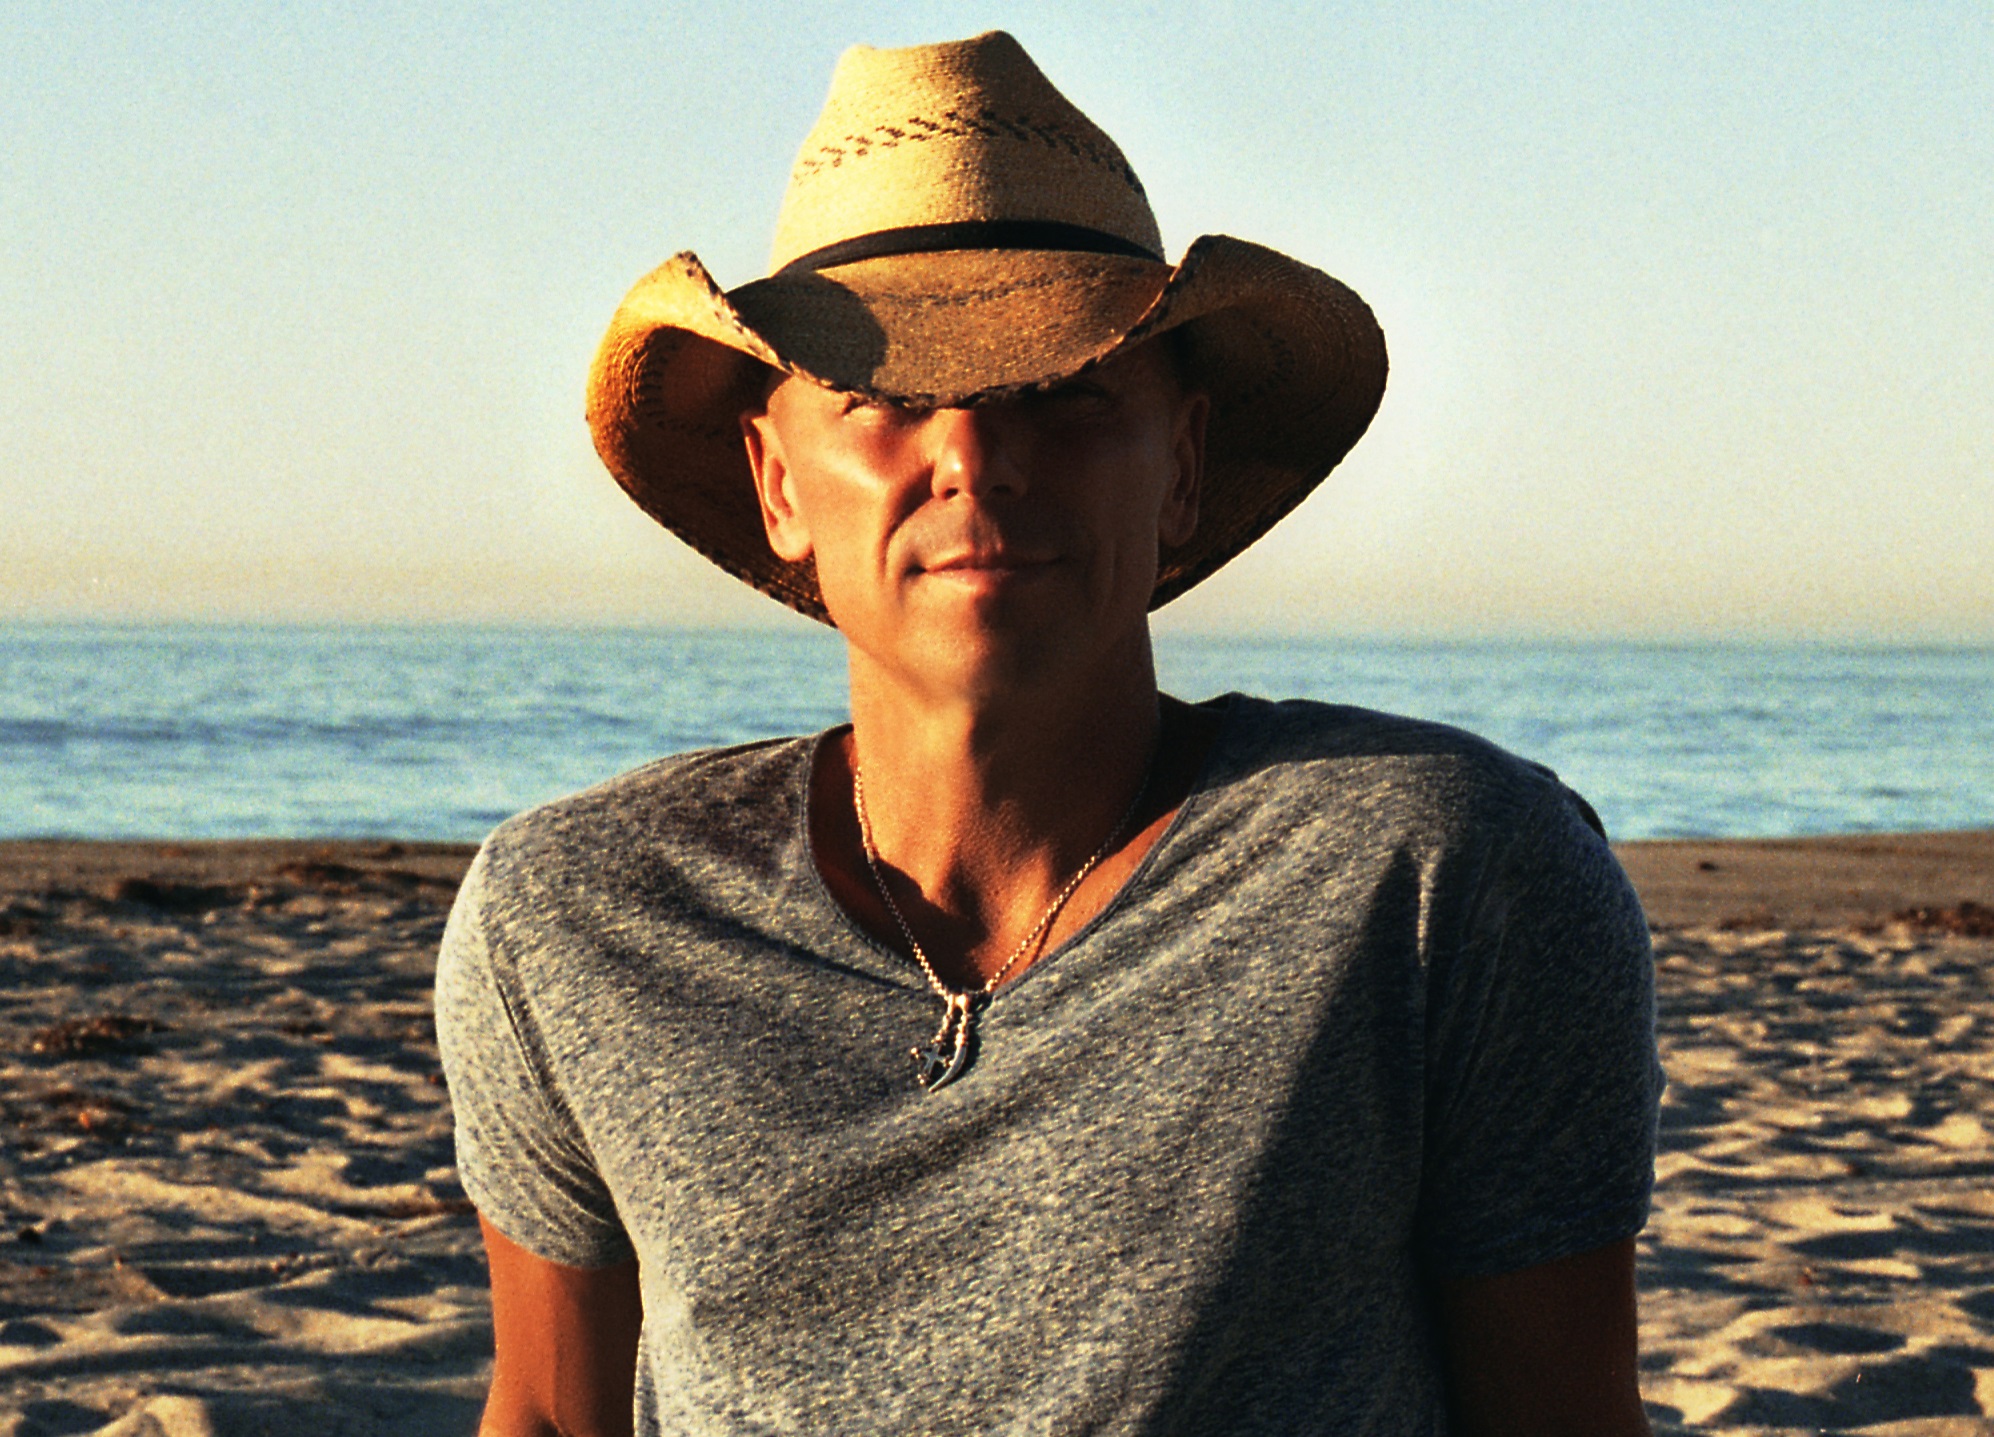 Kenny Chesney Sends a 'Hallelujah' to Church for the Gift of Music - Sounds Like Nashville